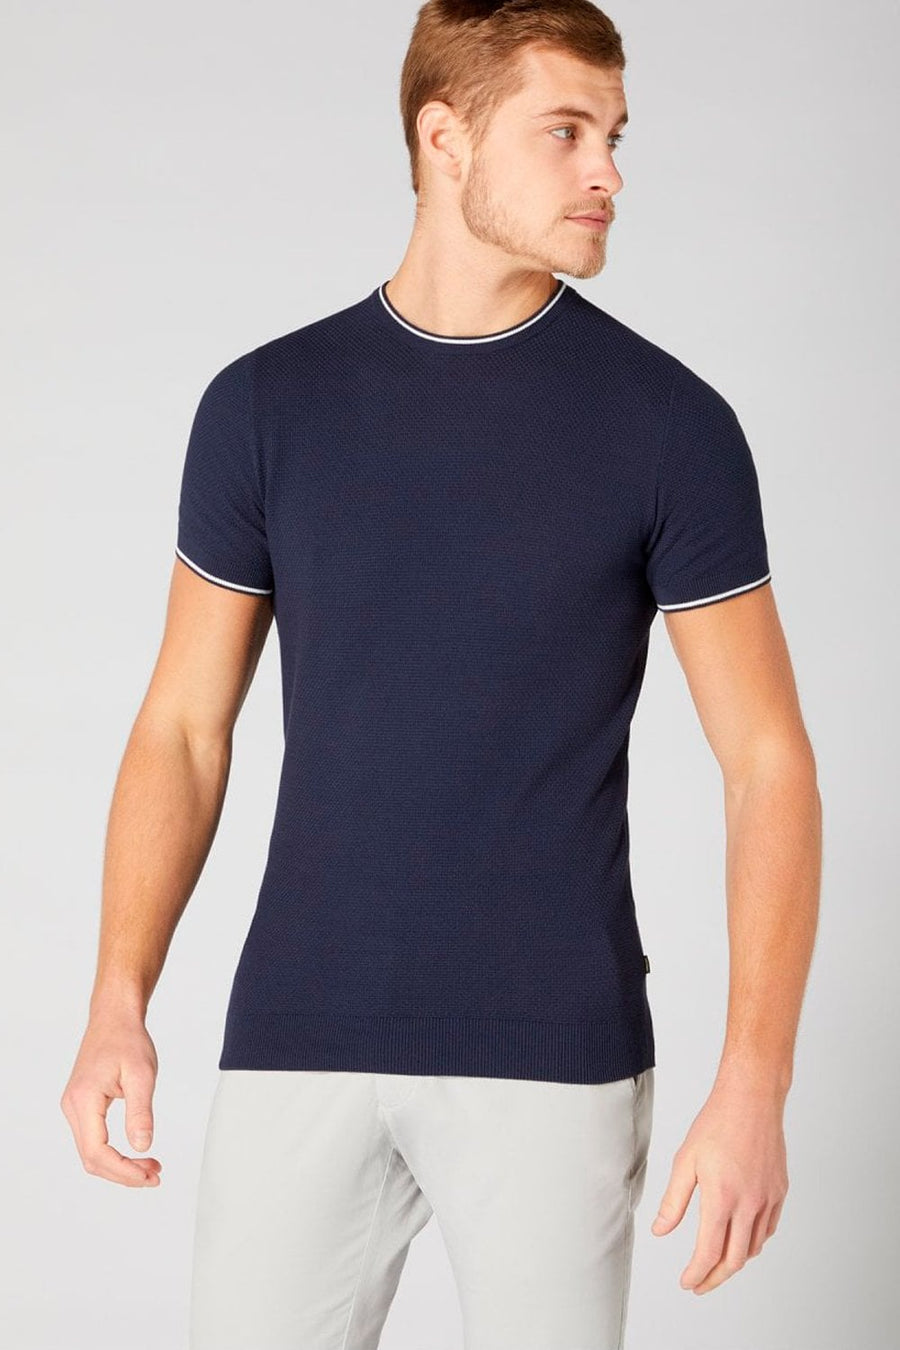 Buy the Remus Uomo Knitted S/S T-Shirt Navy at Intro. Spend £50 for free UK delivery. Official stockists. We ship worldwide.